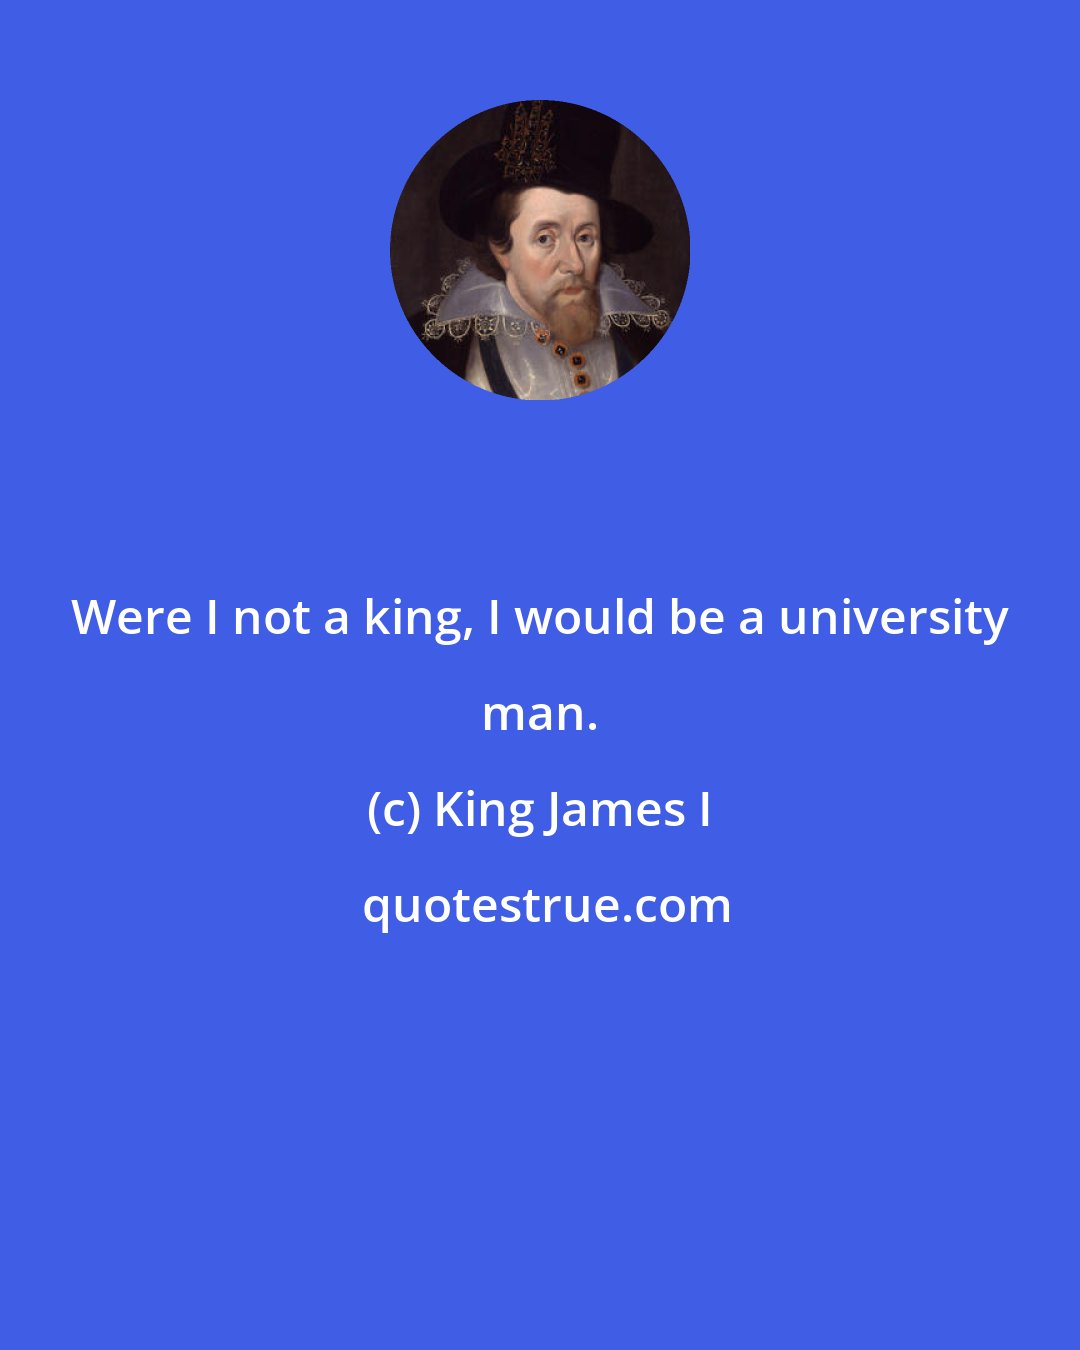 King James I: Were I not a king, I would be a university man.